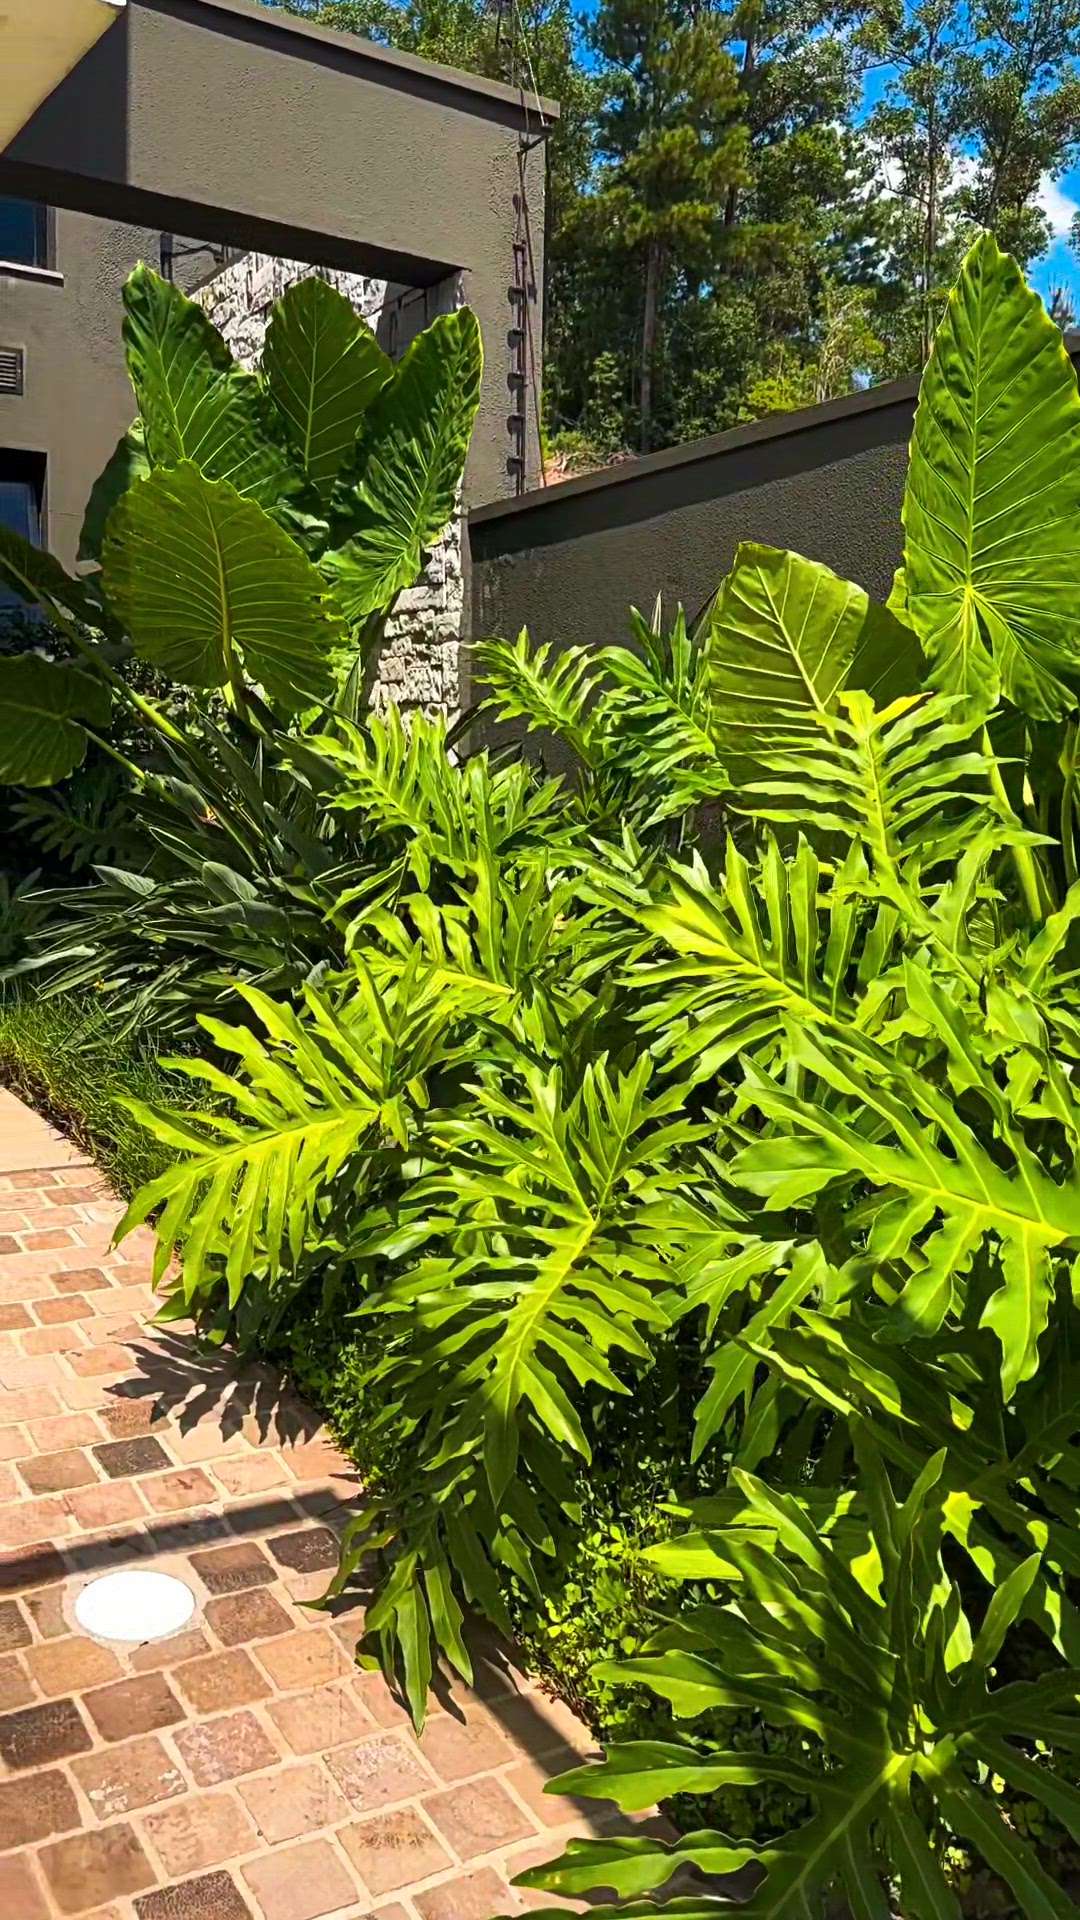 Tropical and blend garden. New and unique way of setting soft scaping

#LandscapeIdeas #LandscapeGarden #LandscapeDesign #treaditional #GardeningIdeas #landscapearchitecture #Architectural&nterior #architectsinkerala #IndoorPlants #indoorgarden